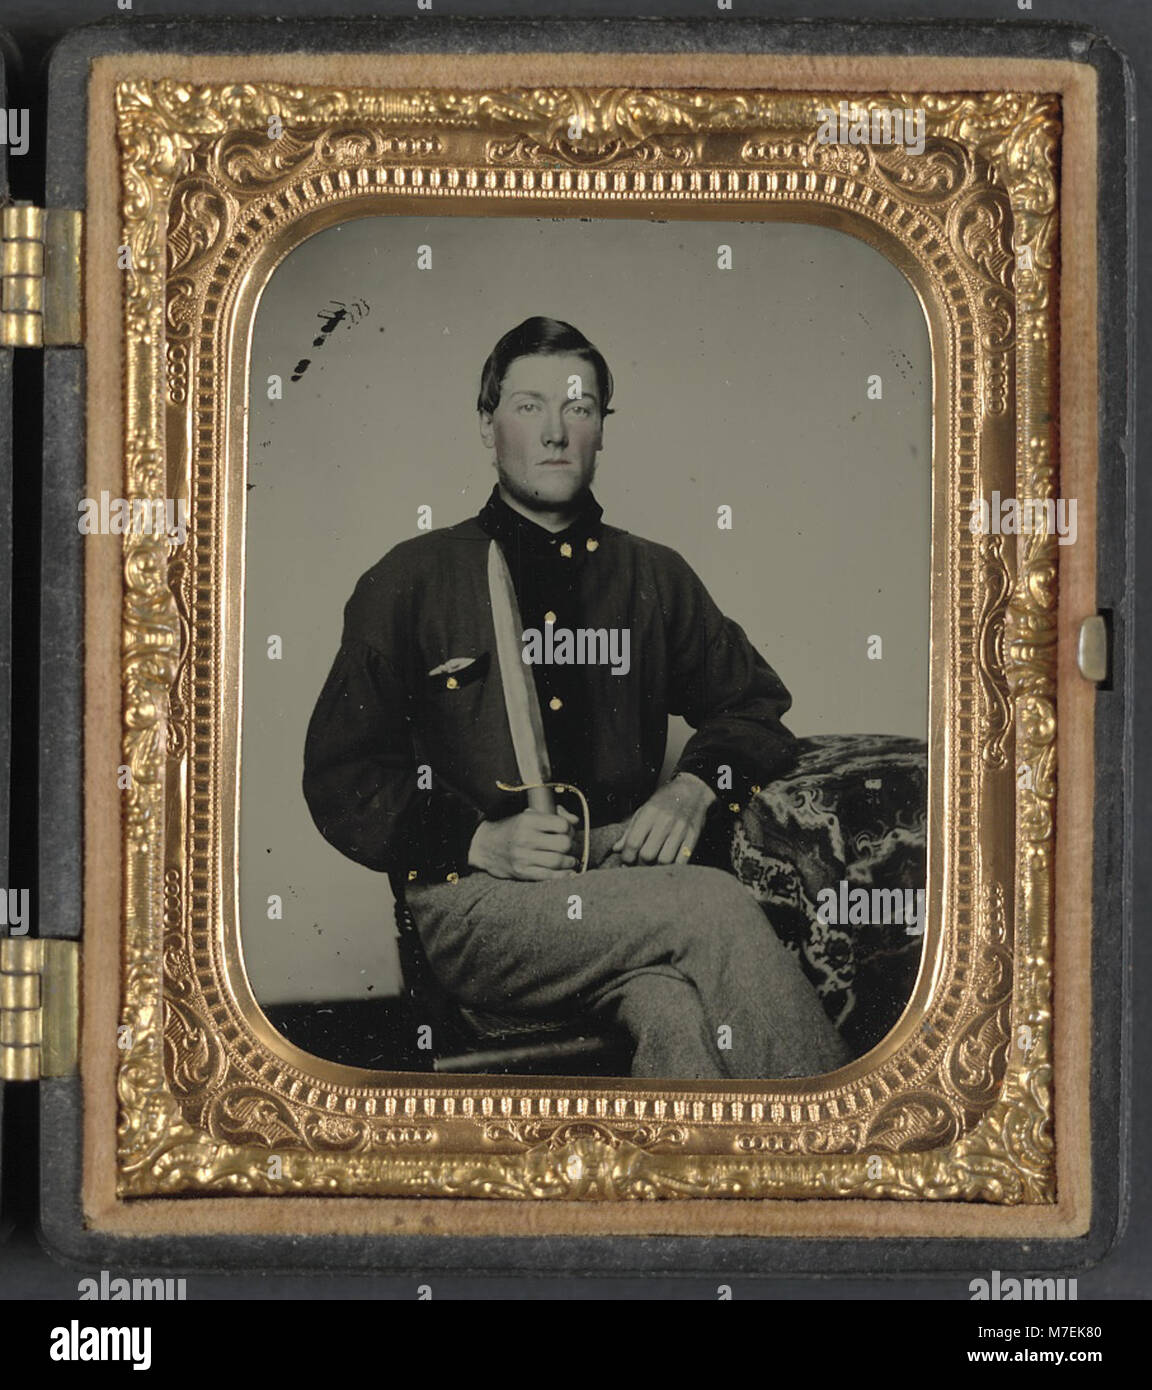 Private David Bowman of Company I, 7th Virginia Cavalry Regiment, or Private Michael Bowman of Company B and Company H, 7th Virginia Cavalry Regiment, in uniform with knife LCCN2012645974 Stock Photo